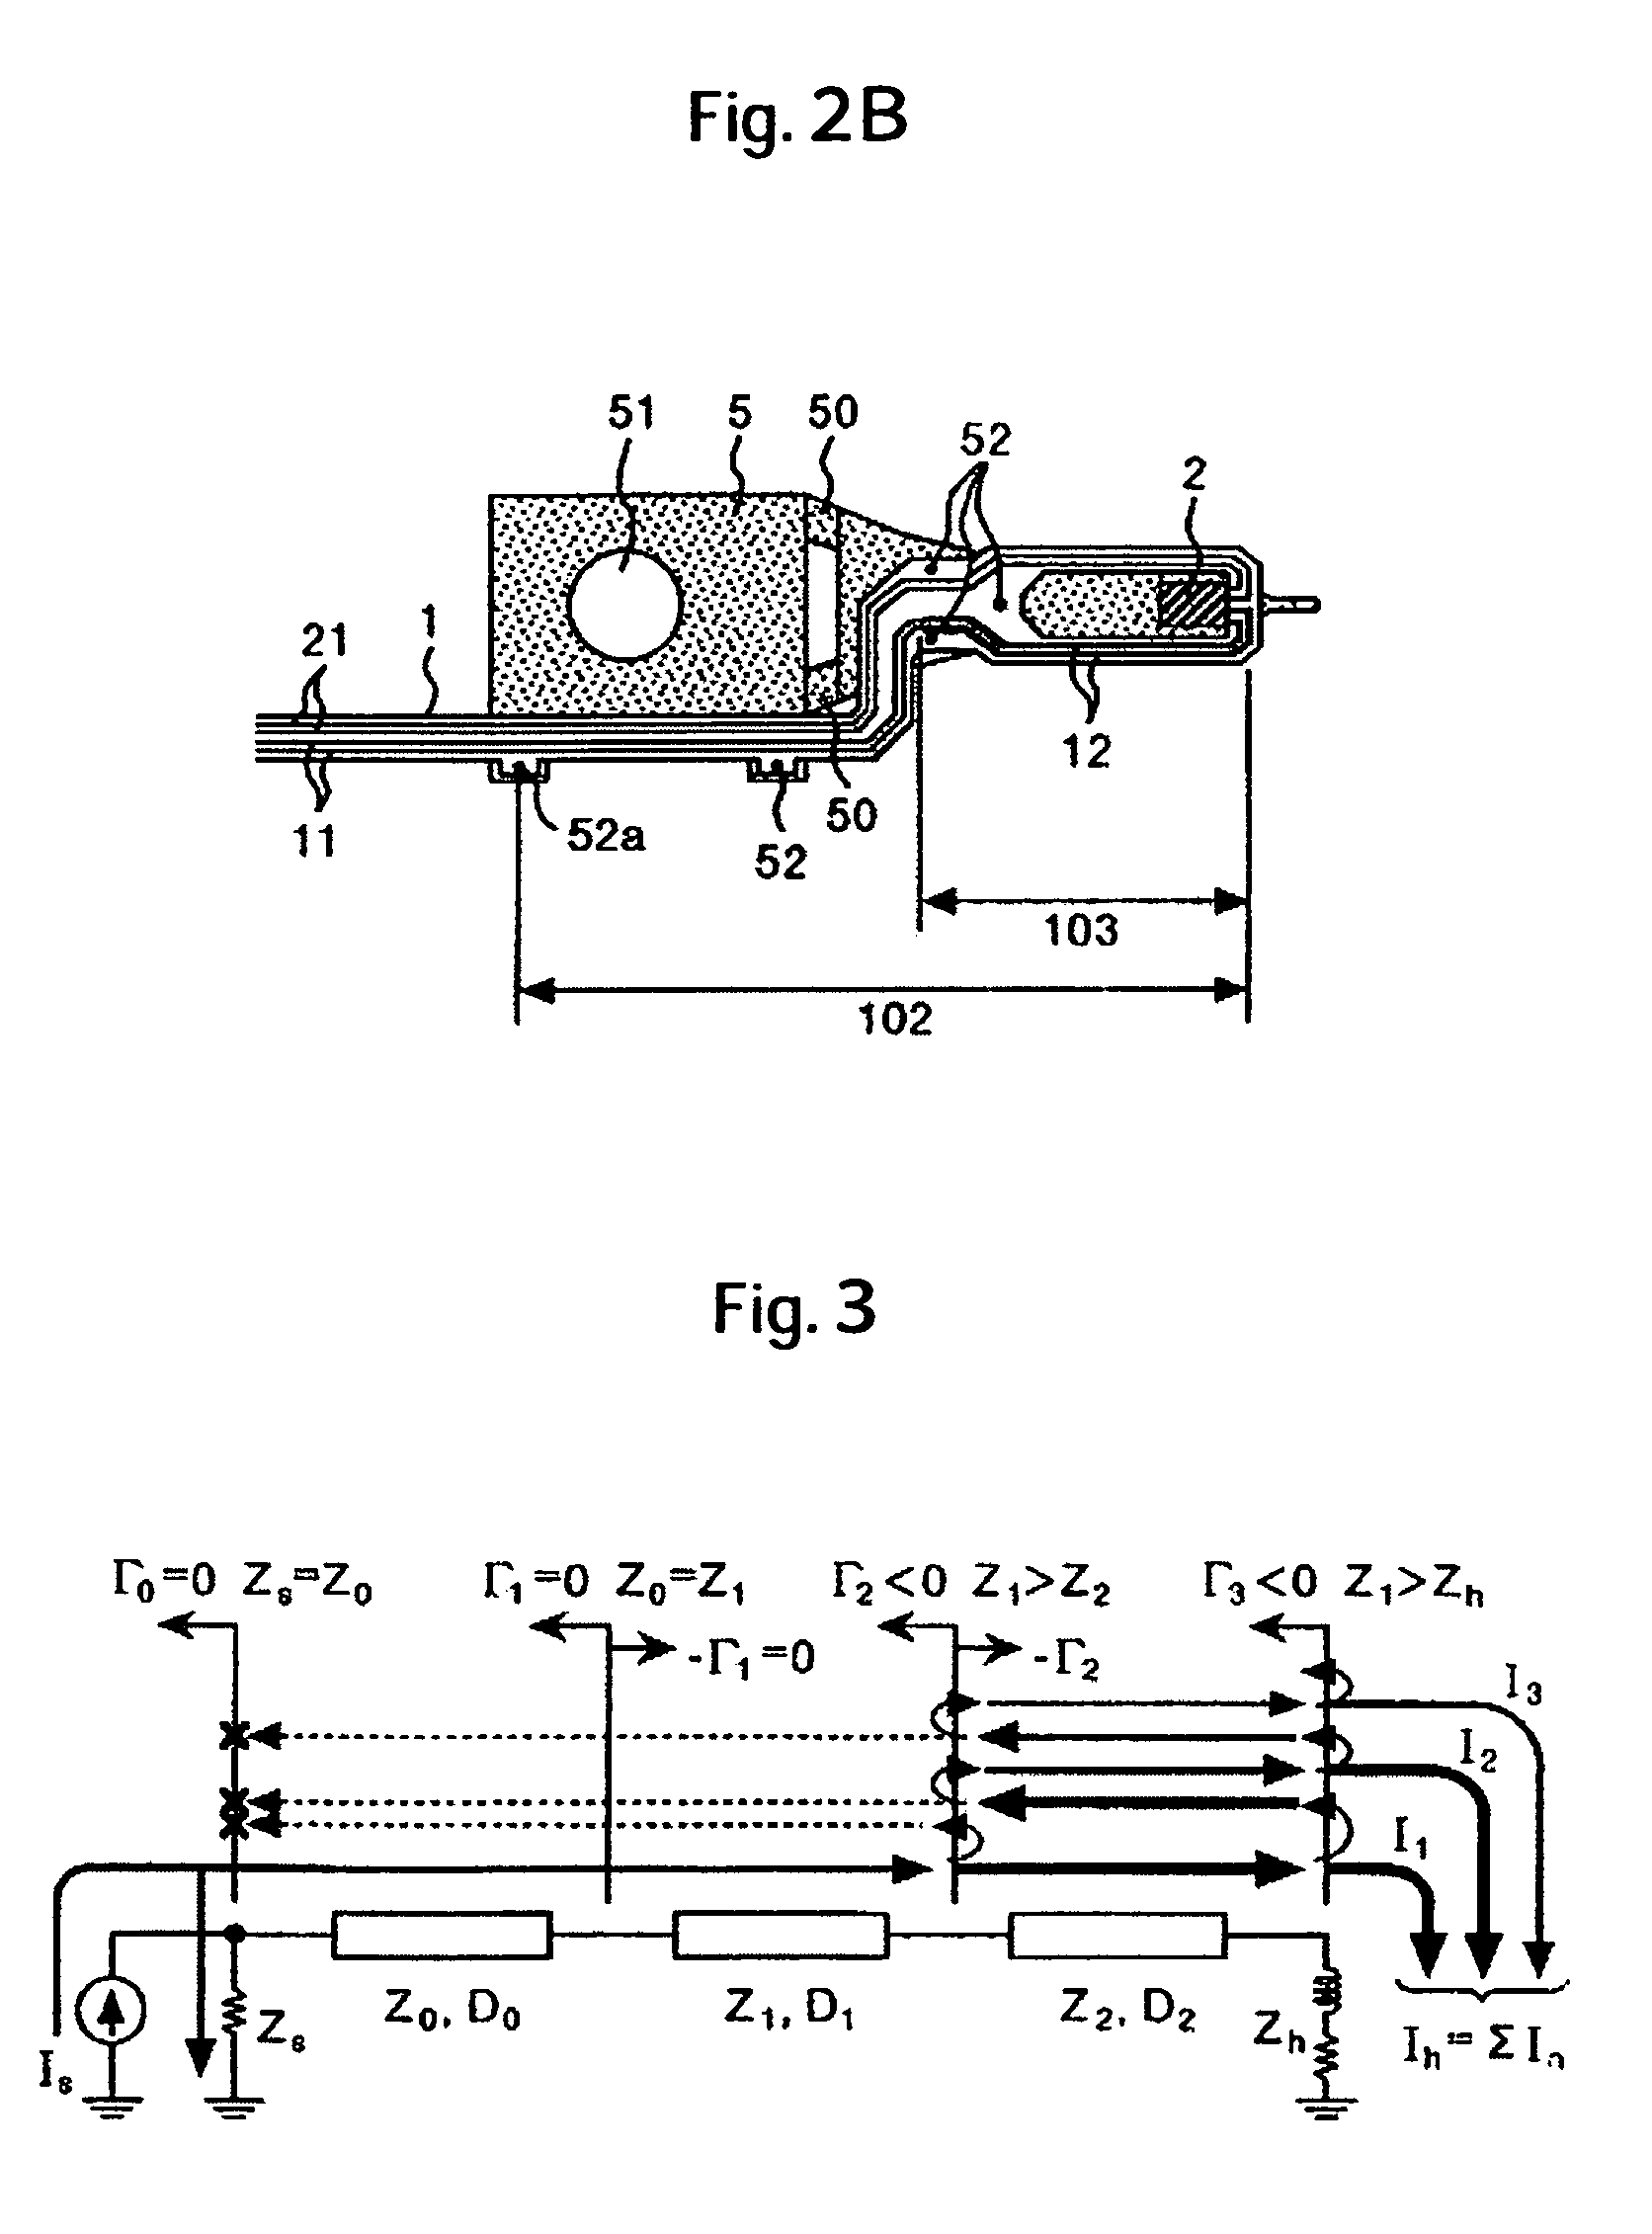 Wiring component and magnetic recording drive for high data-rate recording